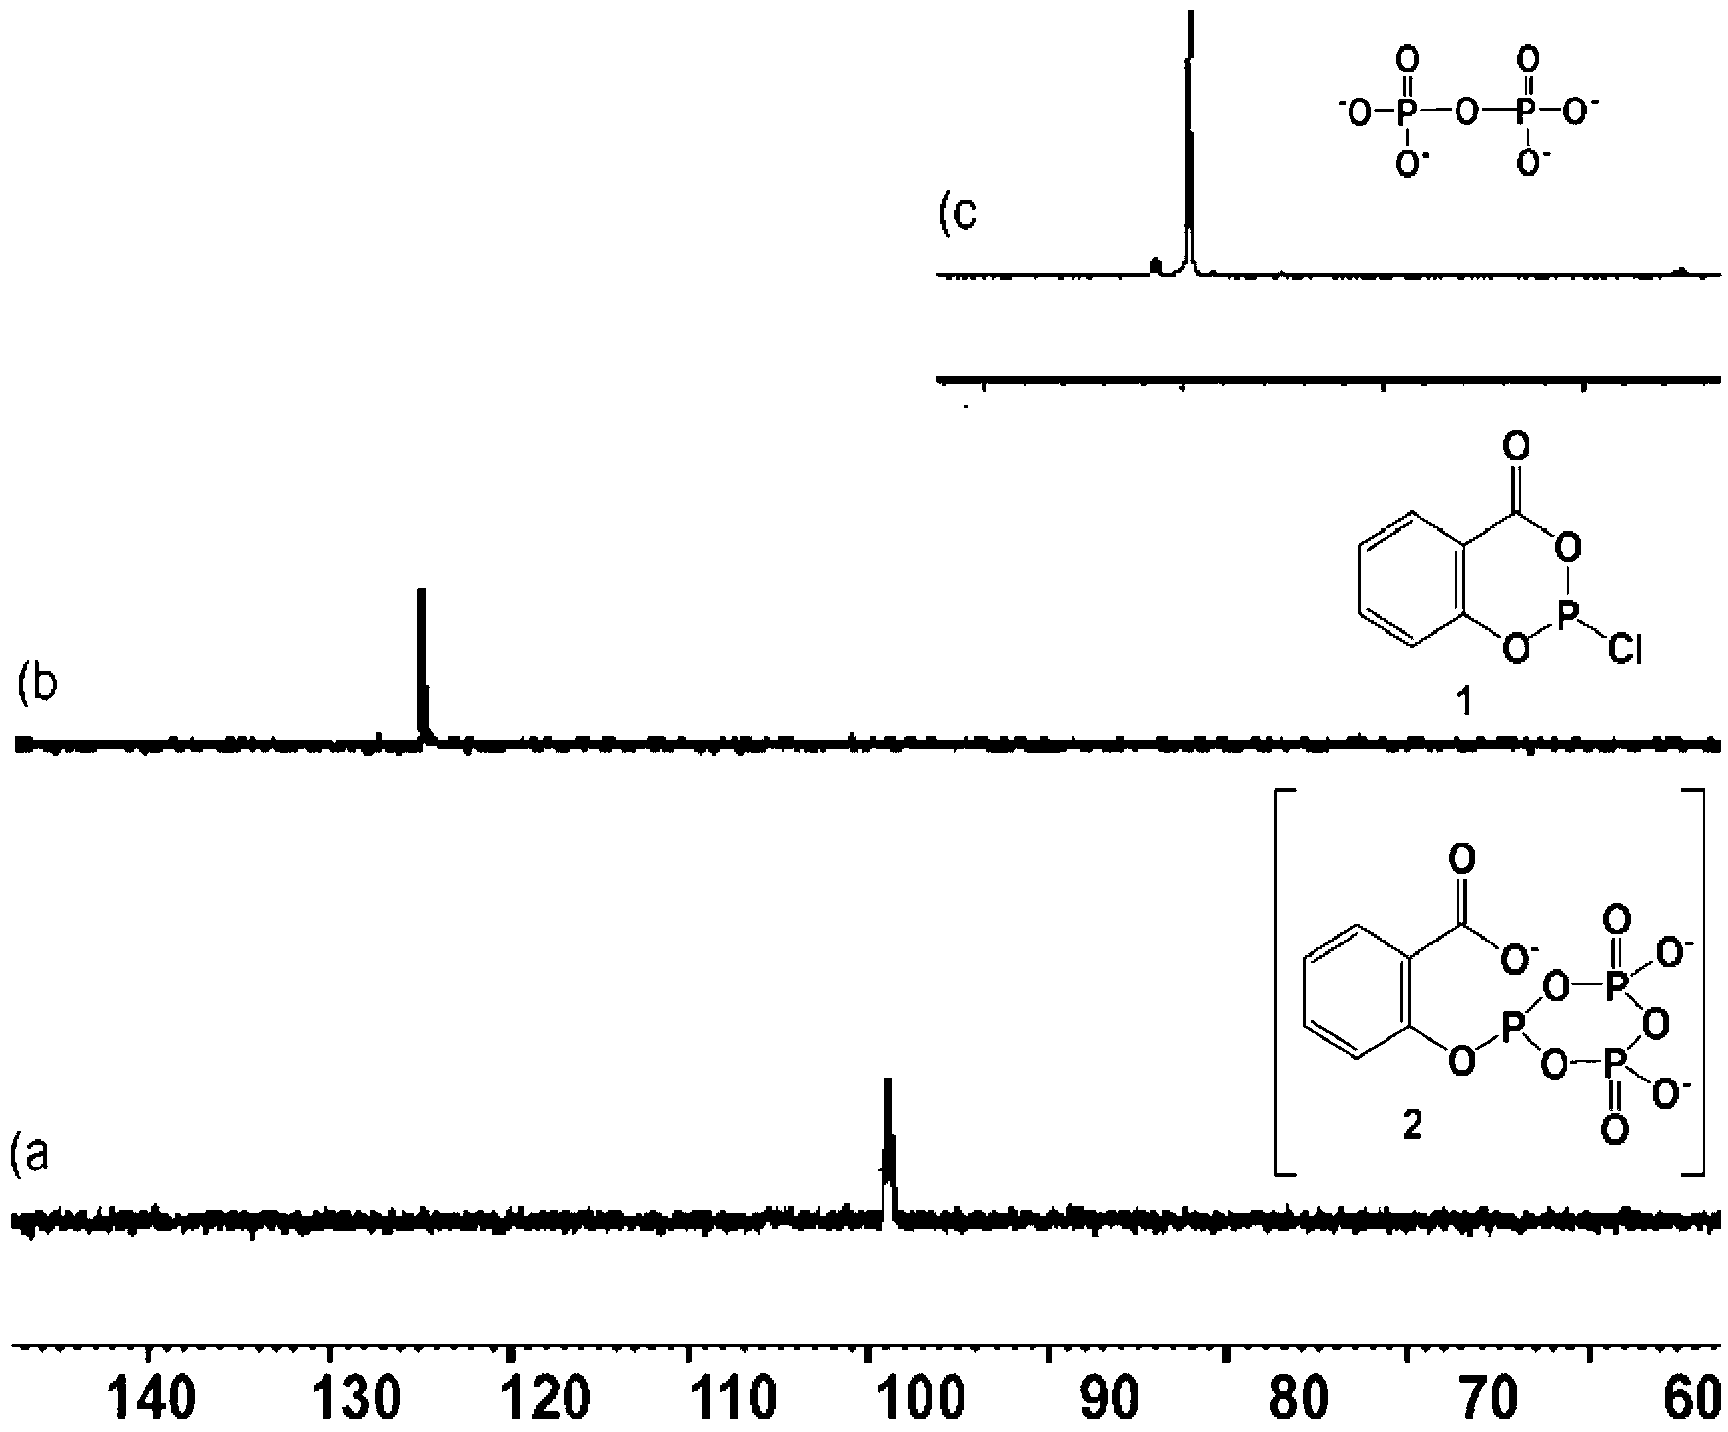 Novel synthesis of nucleoside 5'-triphosphates and their derivatives